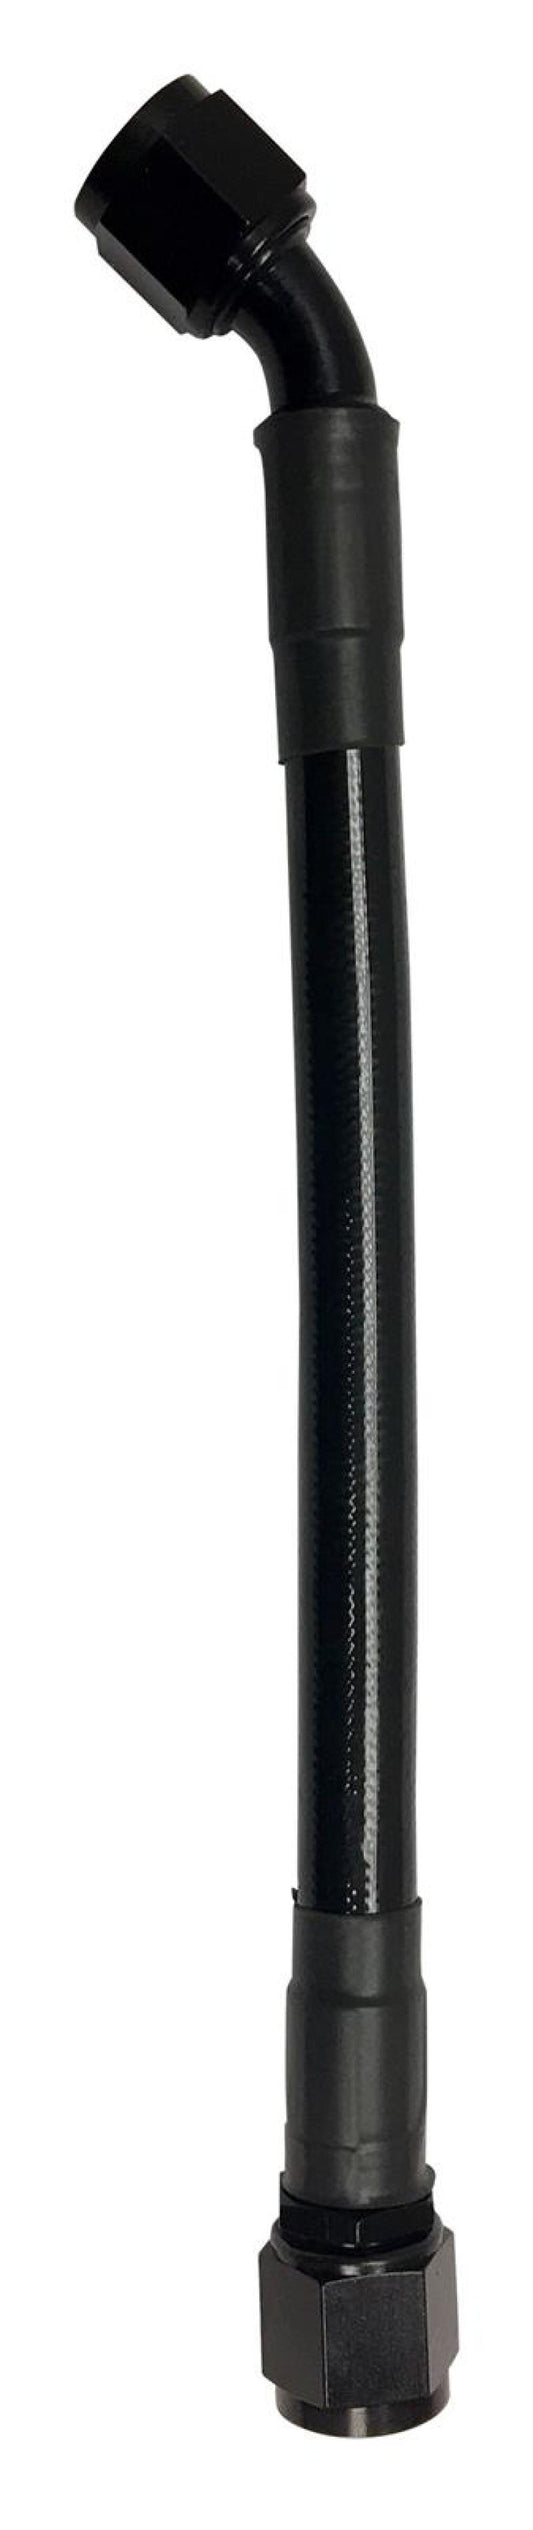 Fragola -10AN Ext Black PTFE Hose Assembly Straight x 45 Degree 10in